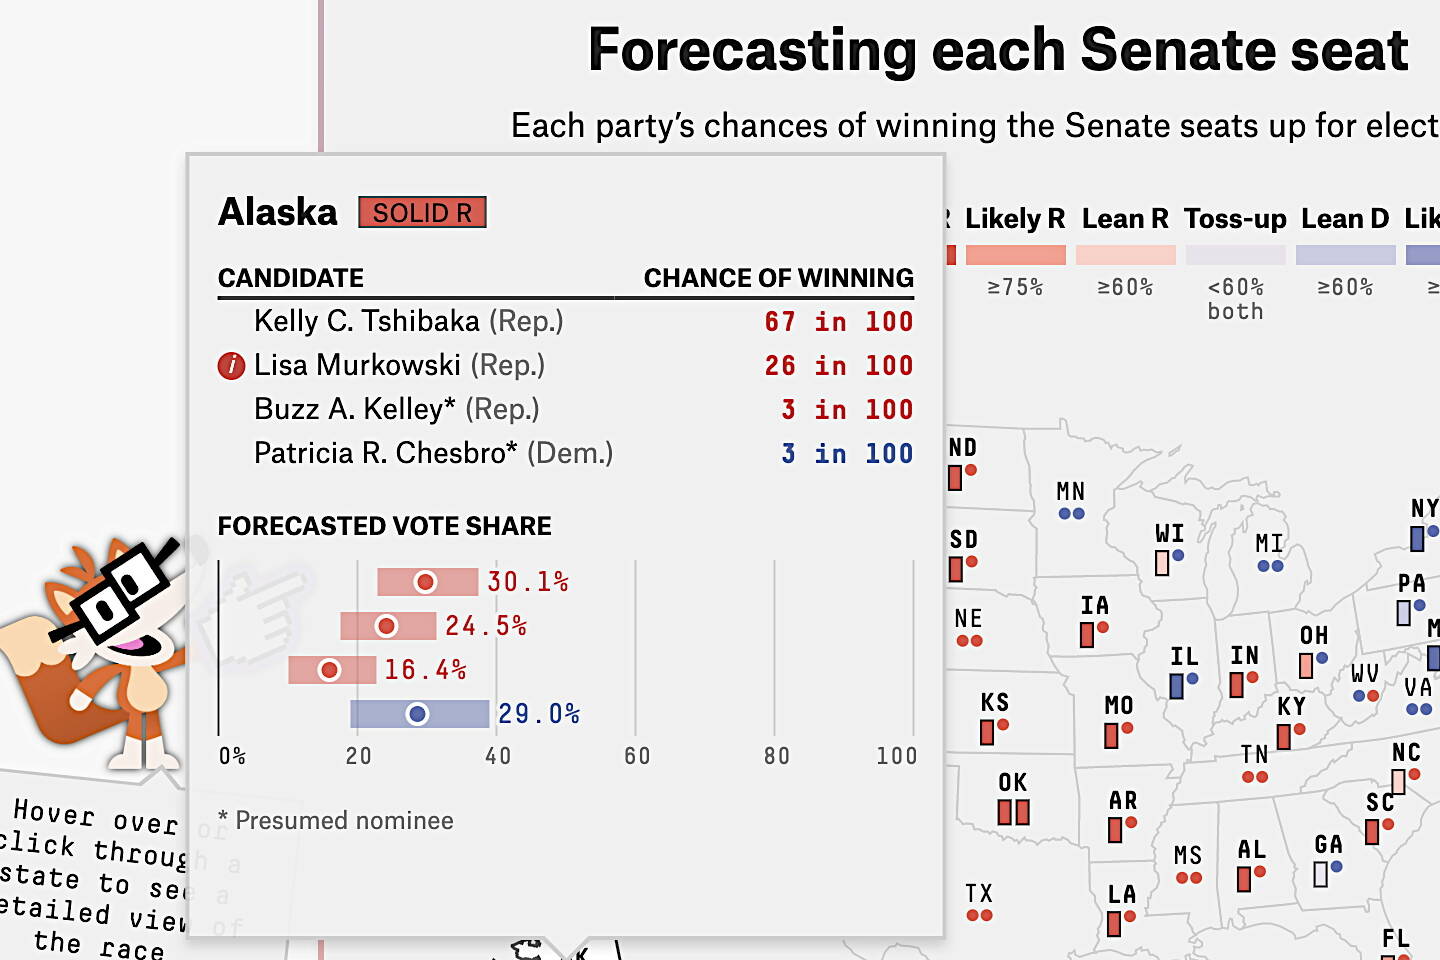 A forecast for Alaska’s U.S. Senate race by FiveThirtyEight, long considered the gold standard in prediction punditry, following Tuesday’s primary is wildly at odds with virtually all polls and conventional wisdom by showing Republican challenger Kelly Tshibaka is the dominant favorite to win in November’s general election. Most analysts expect incumbent Sen. Lisa Murkowski to be reelected under the new ranked choice voting system due to support from Democrats and Independents. Murkowski also defied some predictions by getting the most Republican votes in the primary, although that may have been because the leading Democratic candidate got considerably fewer votes than expected. (Screenshot from FiveThirtyEight)